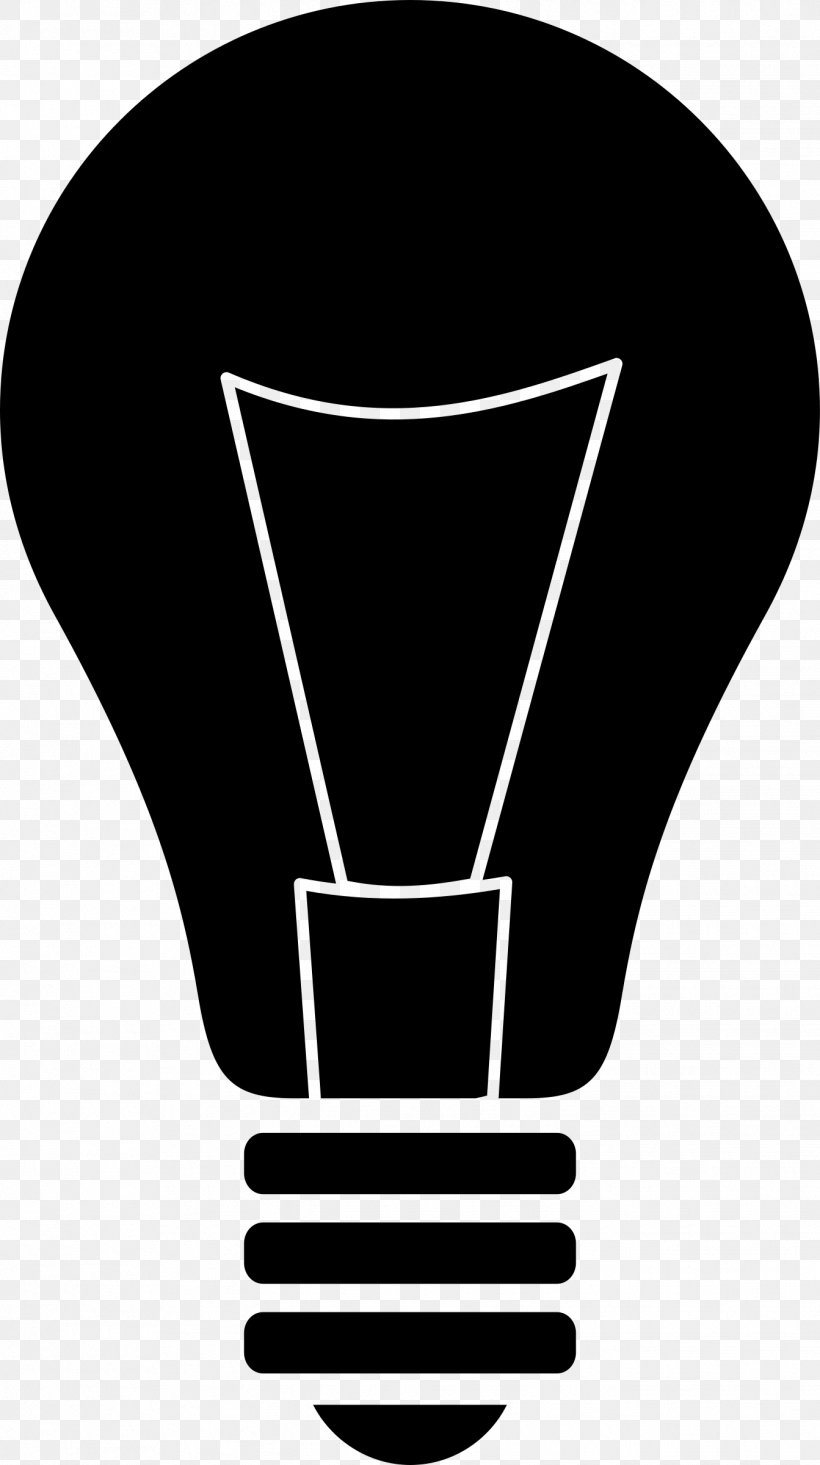 Incandescent Light Bulb Lamp Silhouette Clip Art, PNG, 1343x2400px, Light, Black, Black And White, Compact Fluorescent Lamp, Incandescent Light Bulb Download Free